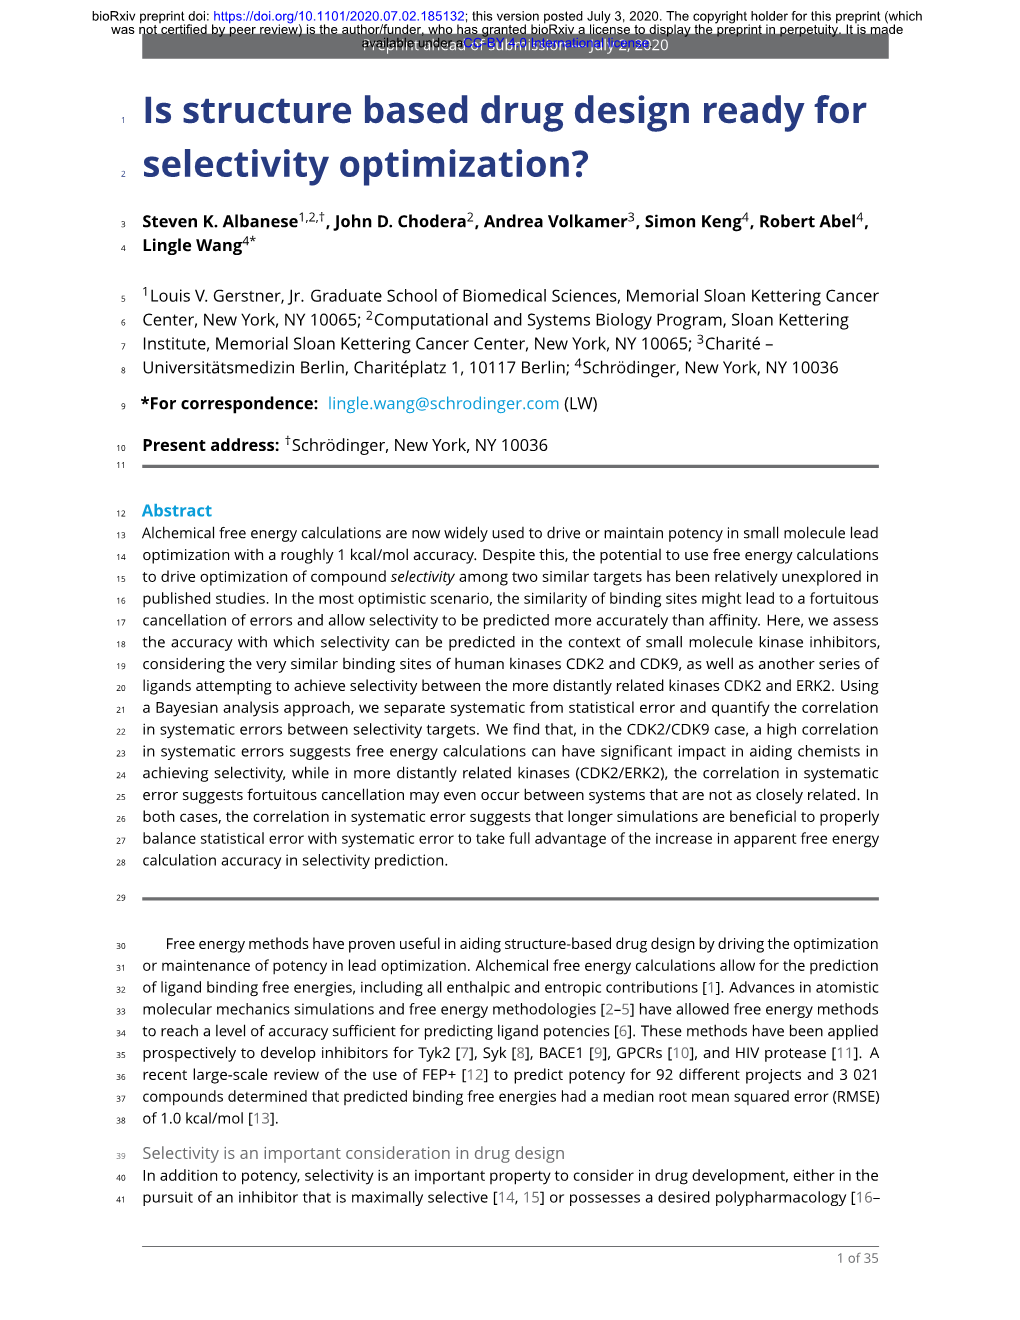 Is Structure Based Drug Design Ready for Selectivity Optimization?